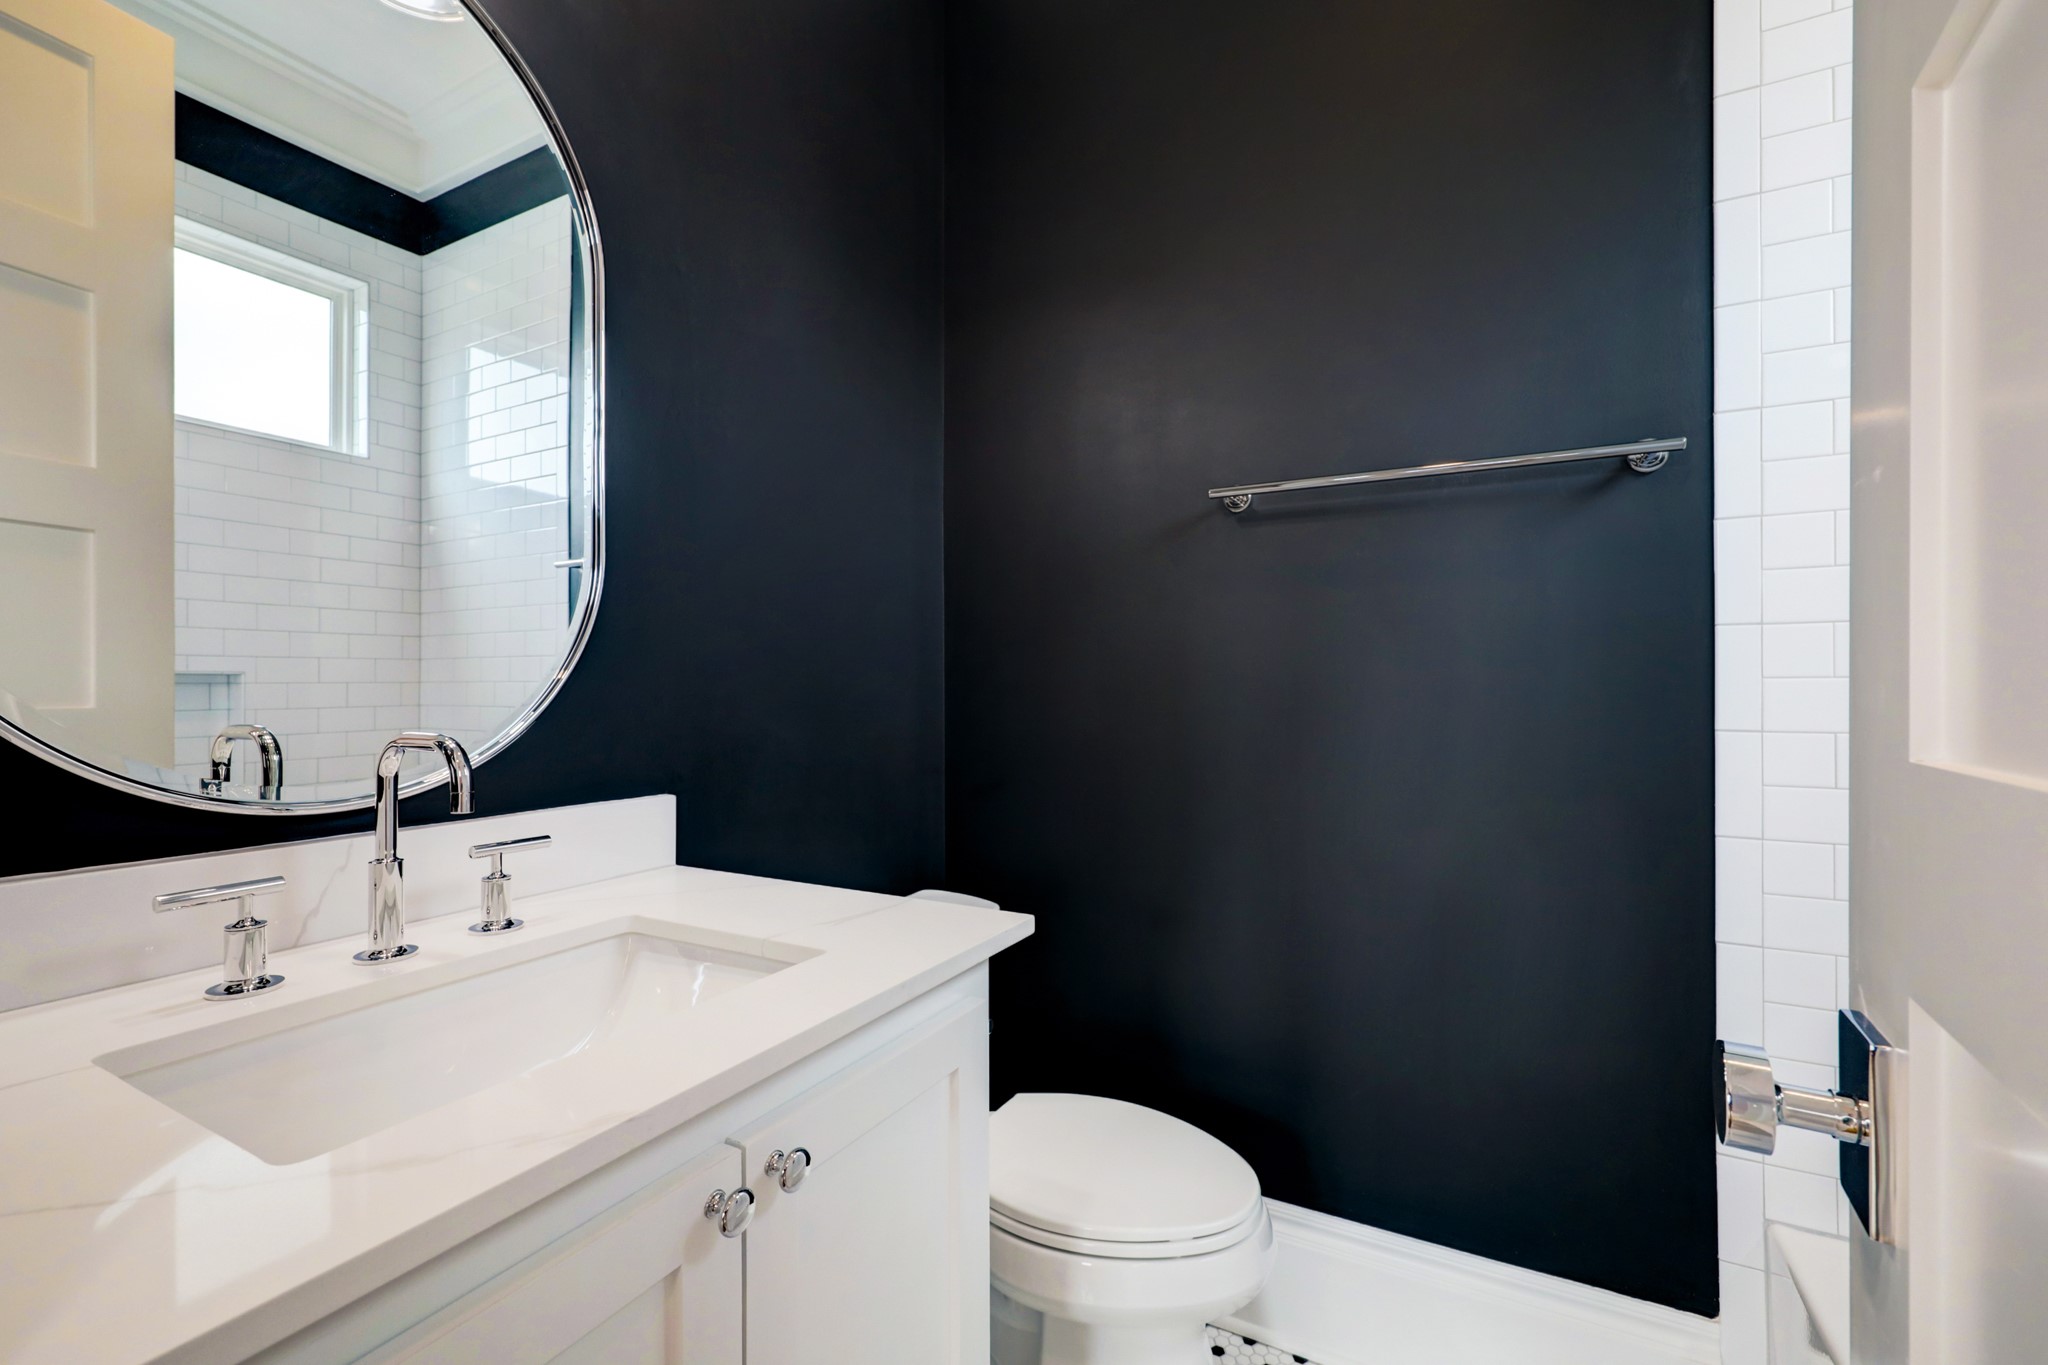  This windowed bathroom shines with floor-to-ceiling tile and chic navy paint.